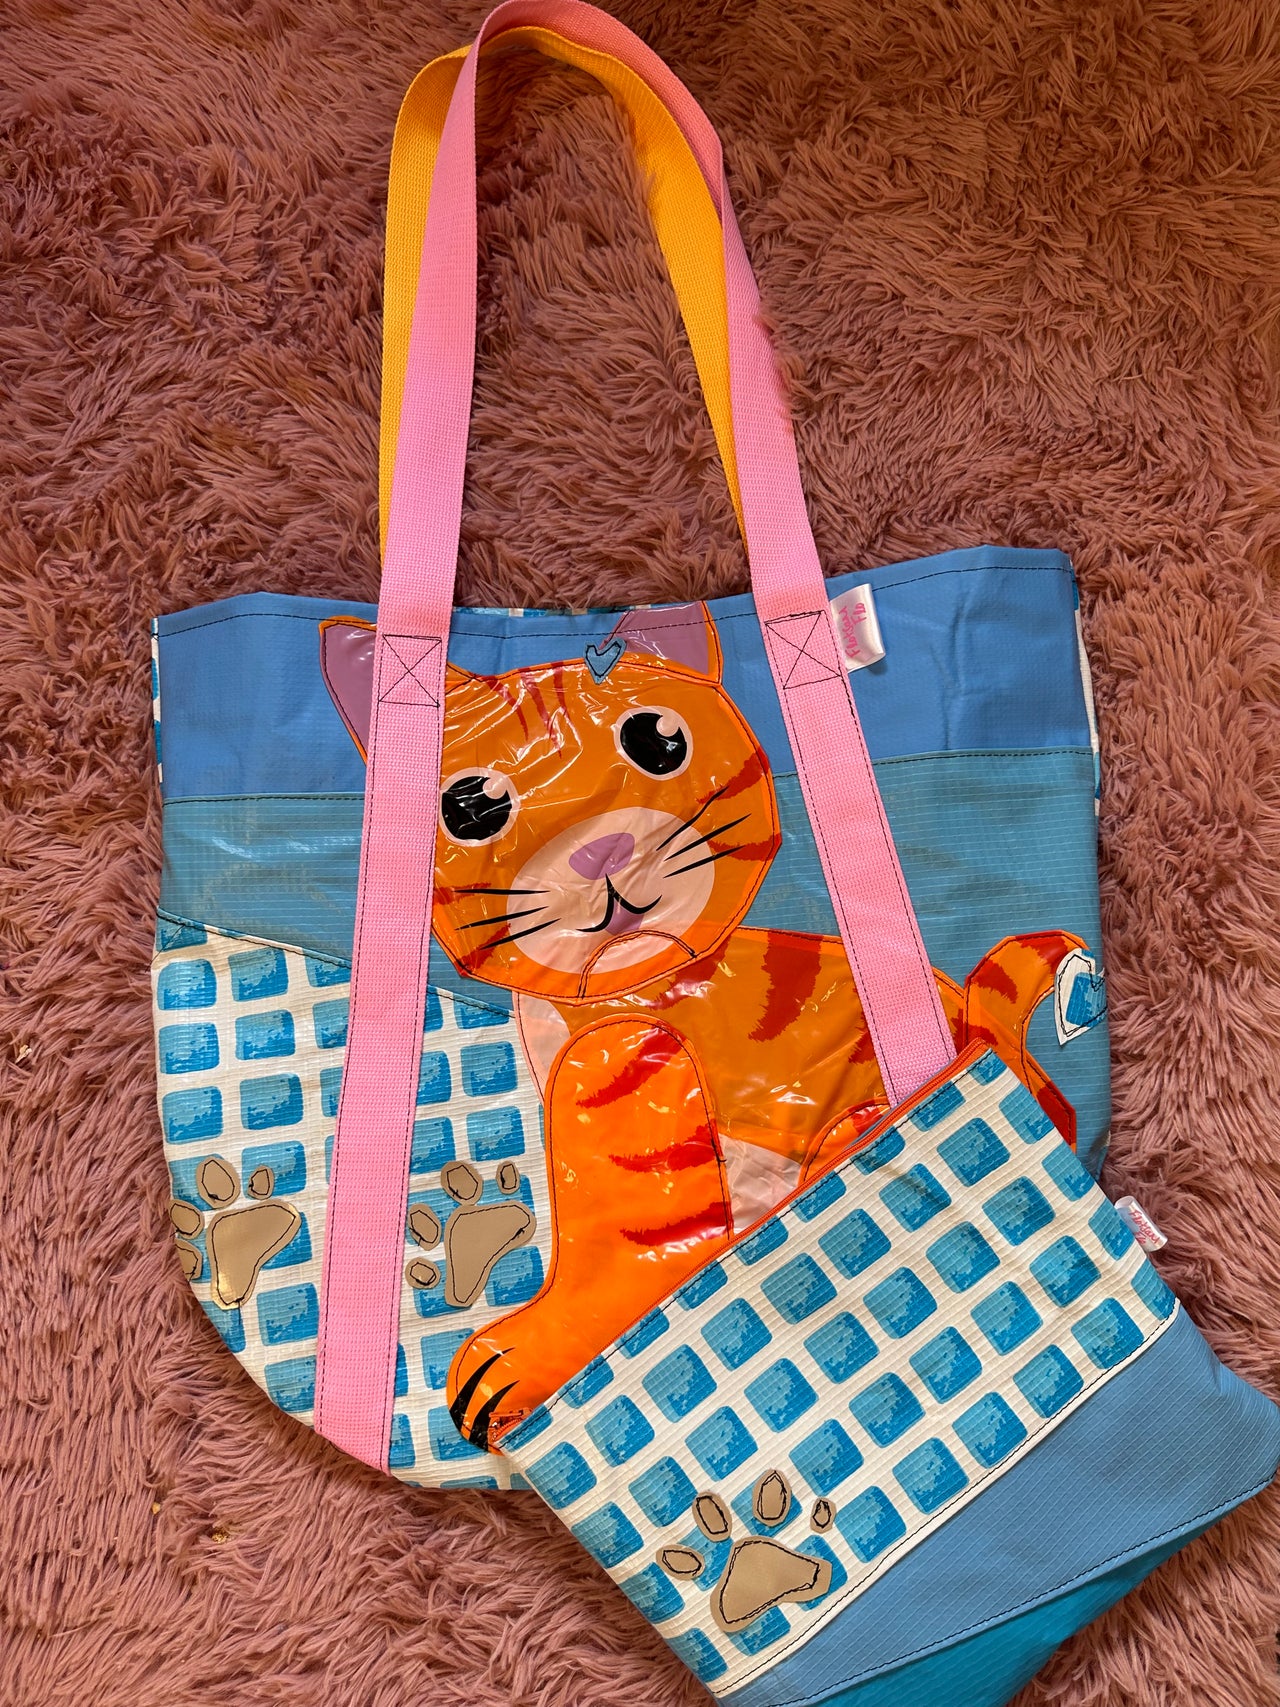 BUNDLE SET - BAG AND POUCH - I used to be a Broken Cat Inflatable, off cuts of canopies and a Paddling Pool - Cat Shoulder Bag with Paw Prints